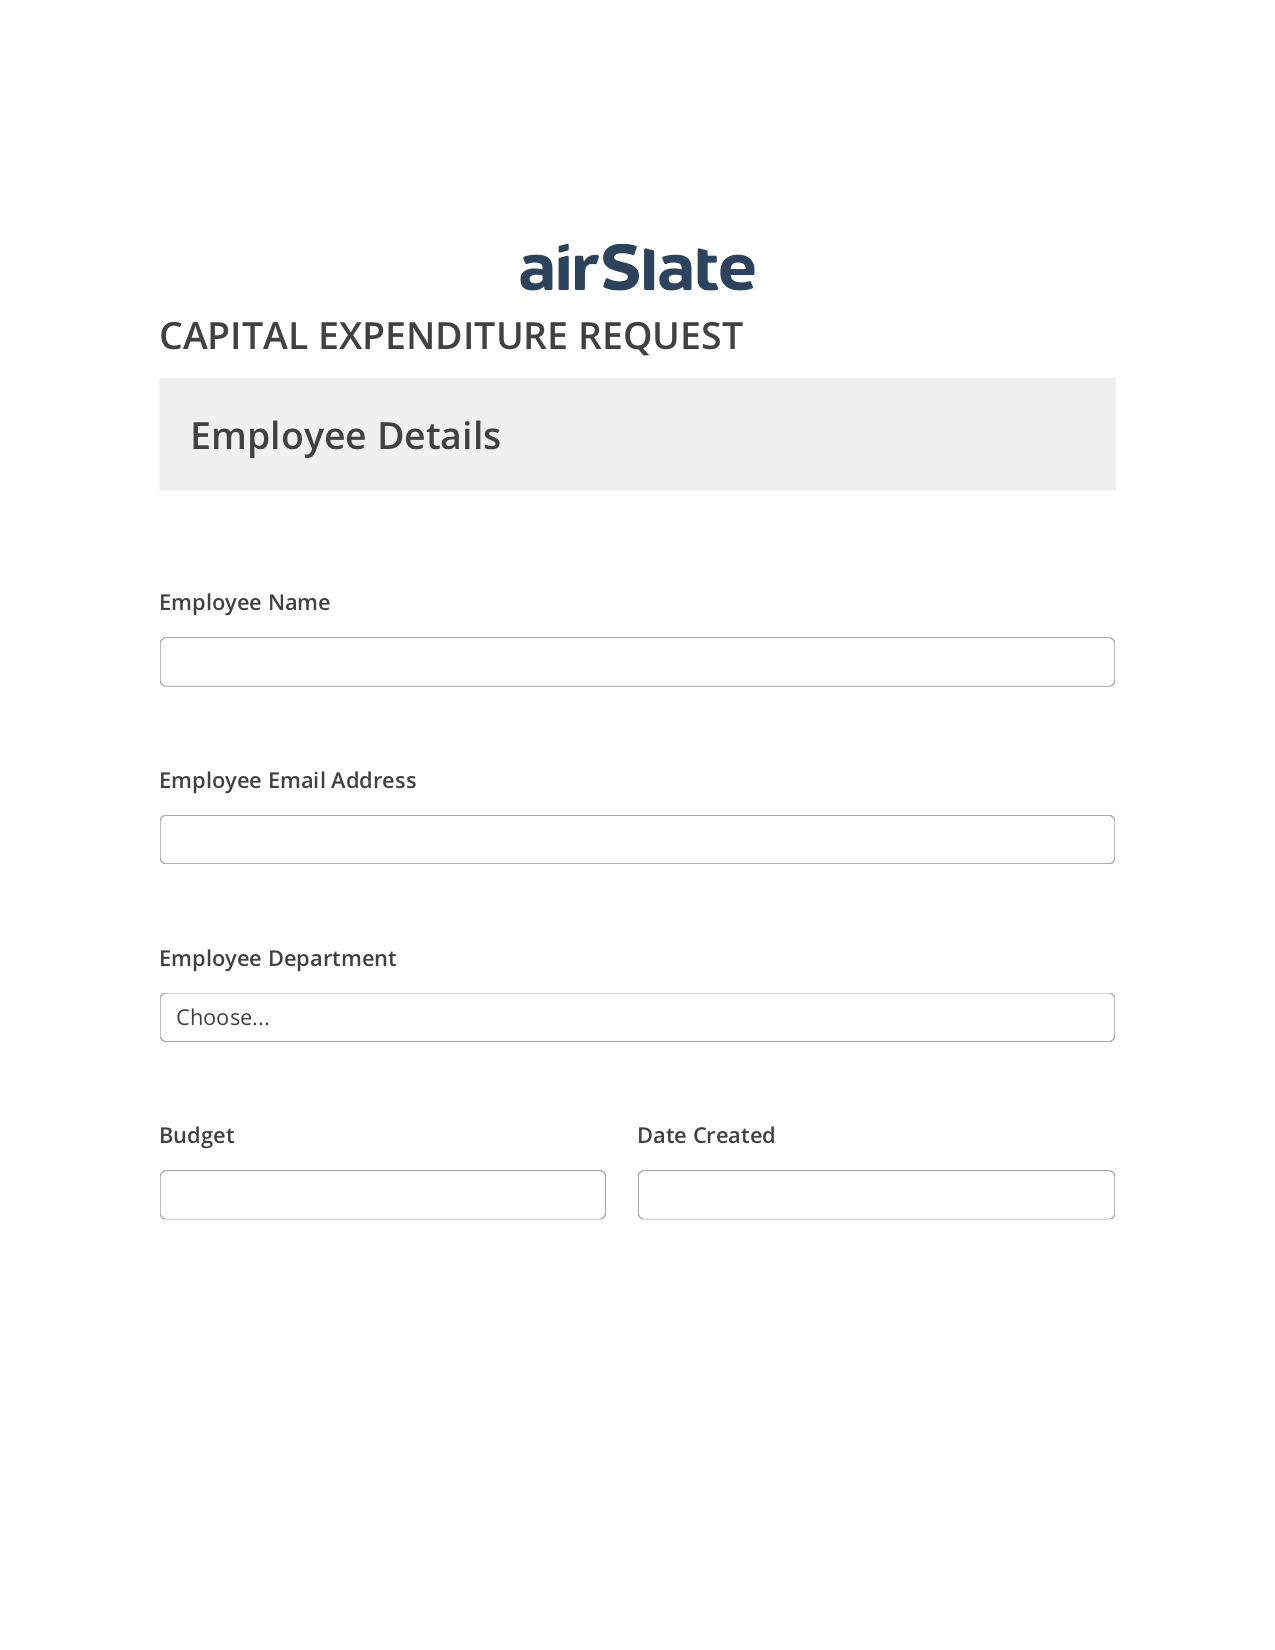 Capital Expenditure Request Approval Workflow Pre-fill from Google Sheets Bot, Create Slate every Google Sheet Update Bot, Export to WebMerge